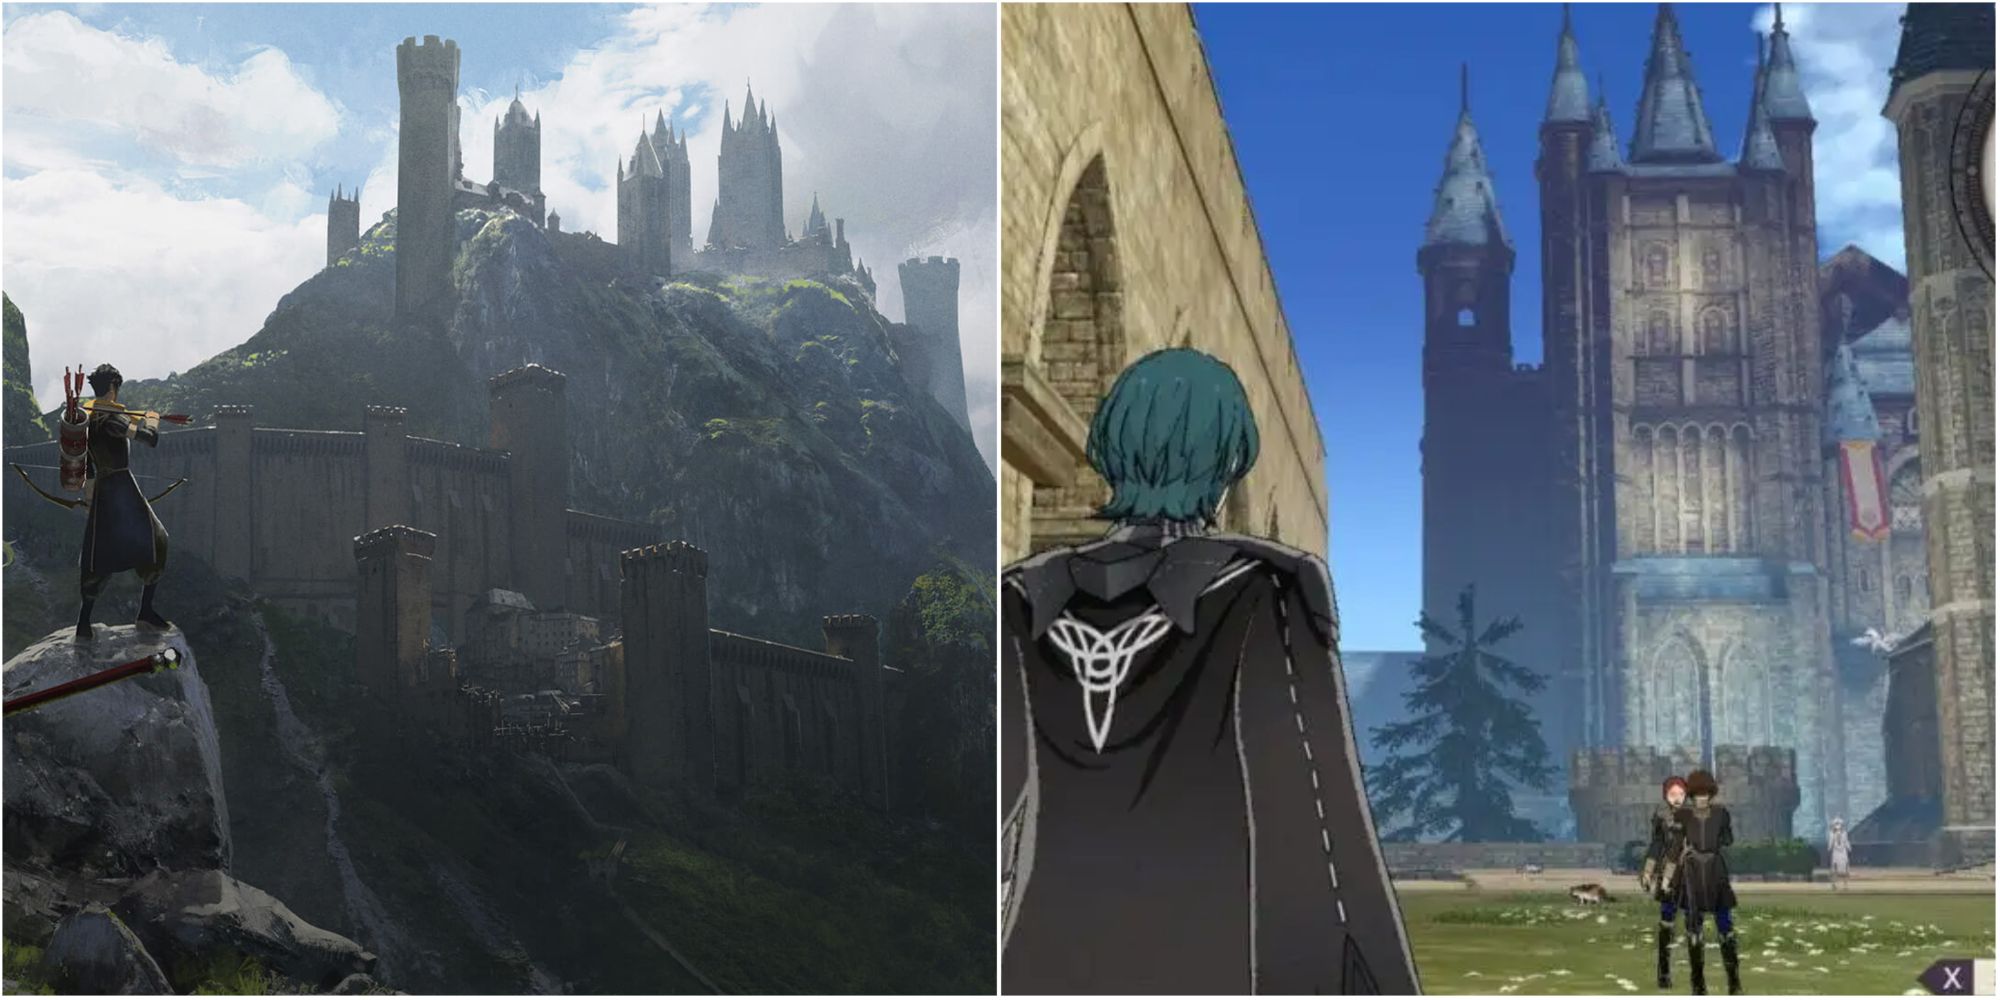 Collage of outside the Garreg Mach Monastery and Byleth walking in the school's grounds in Fire Emblem: Three Houses